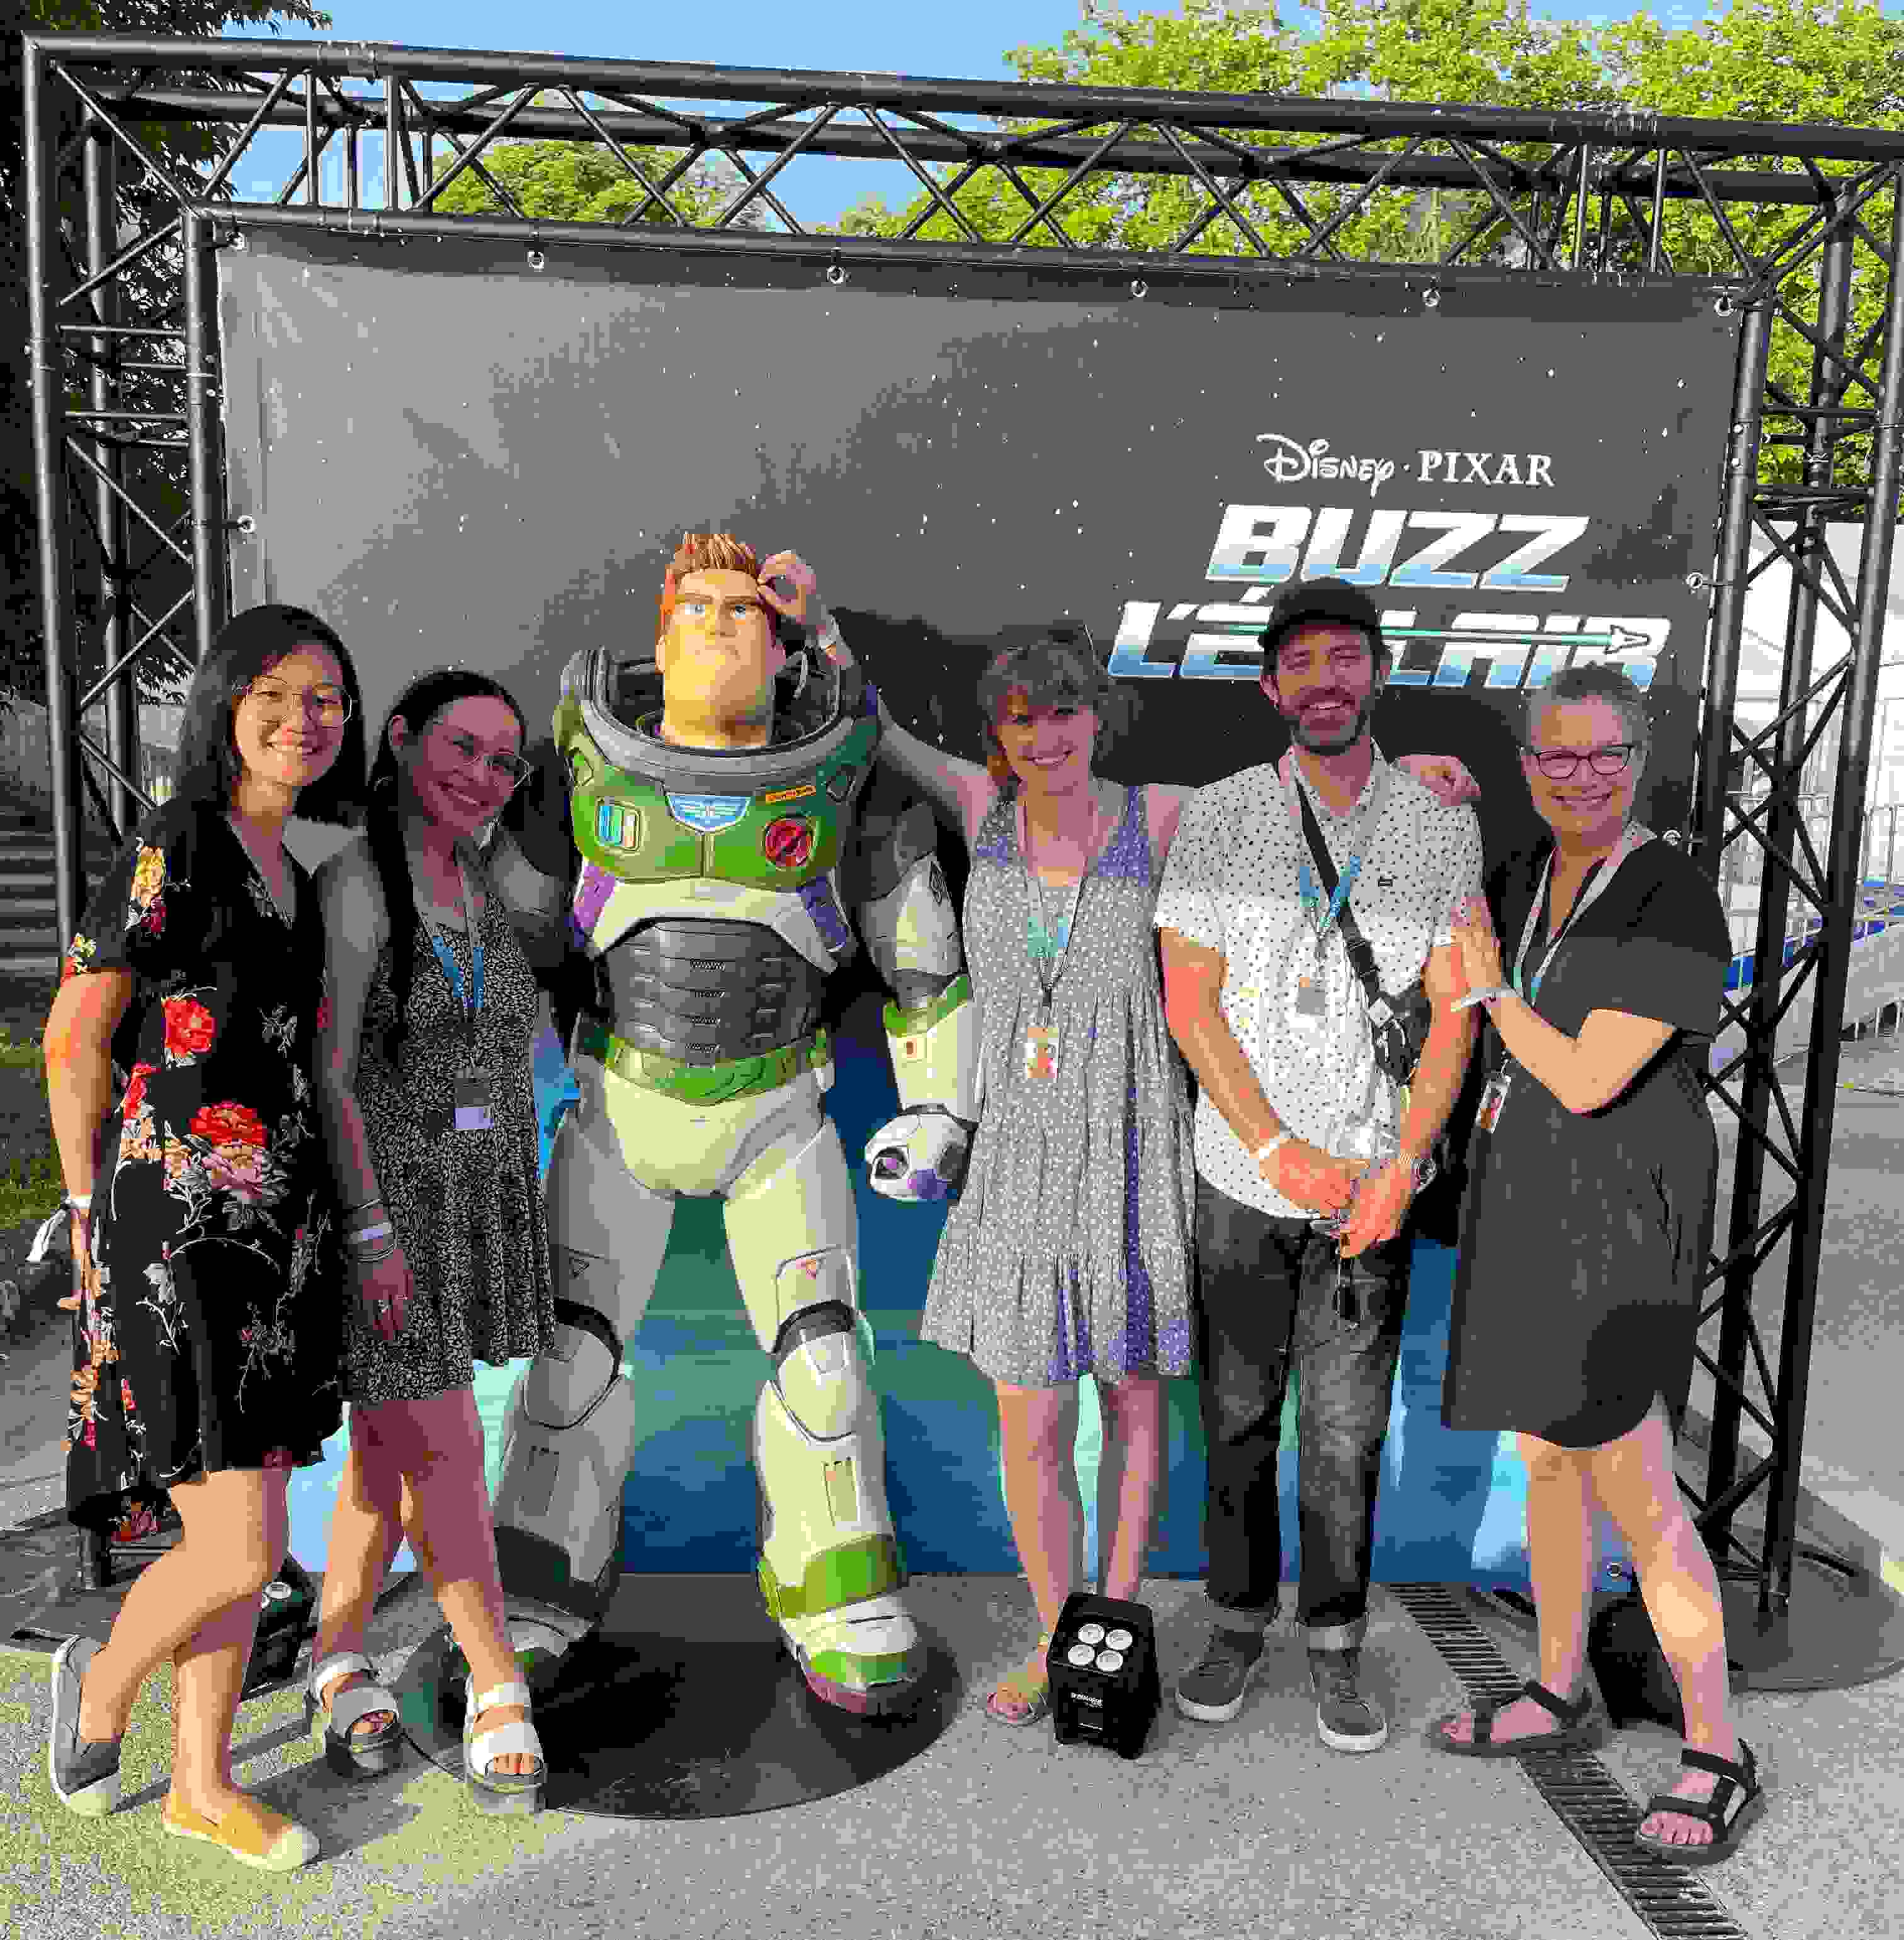 A photograph of people posing in front of a human-sized Buzz Lightyear figurine.